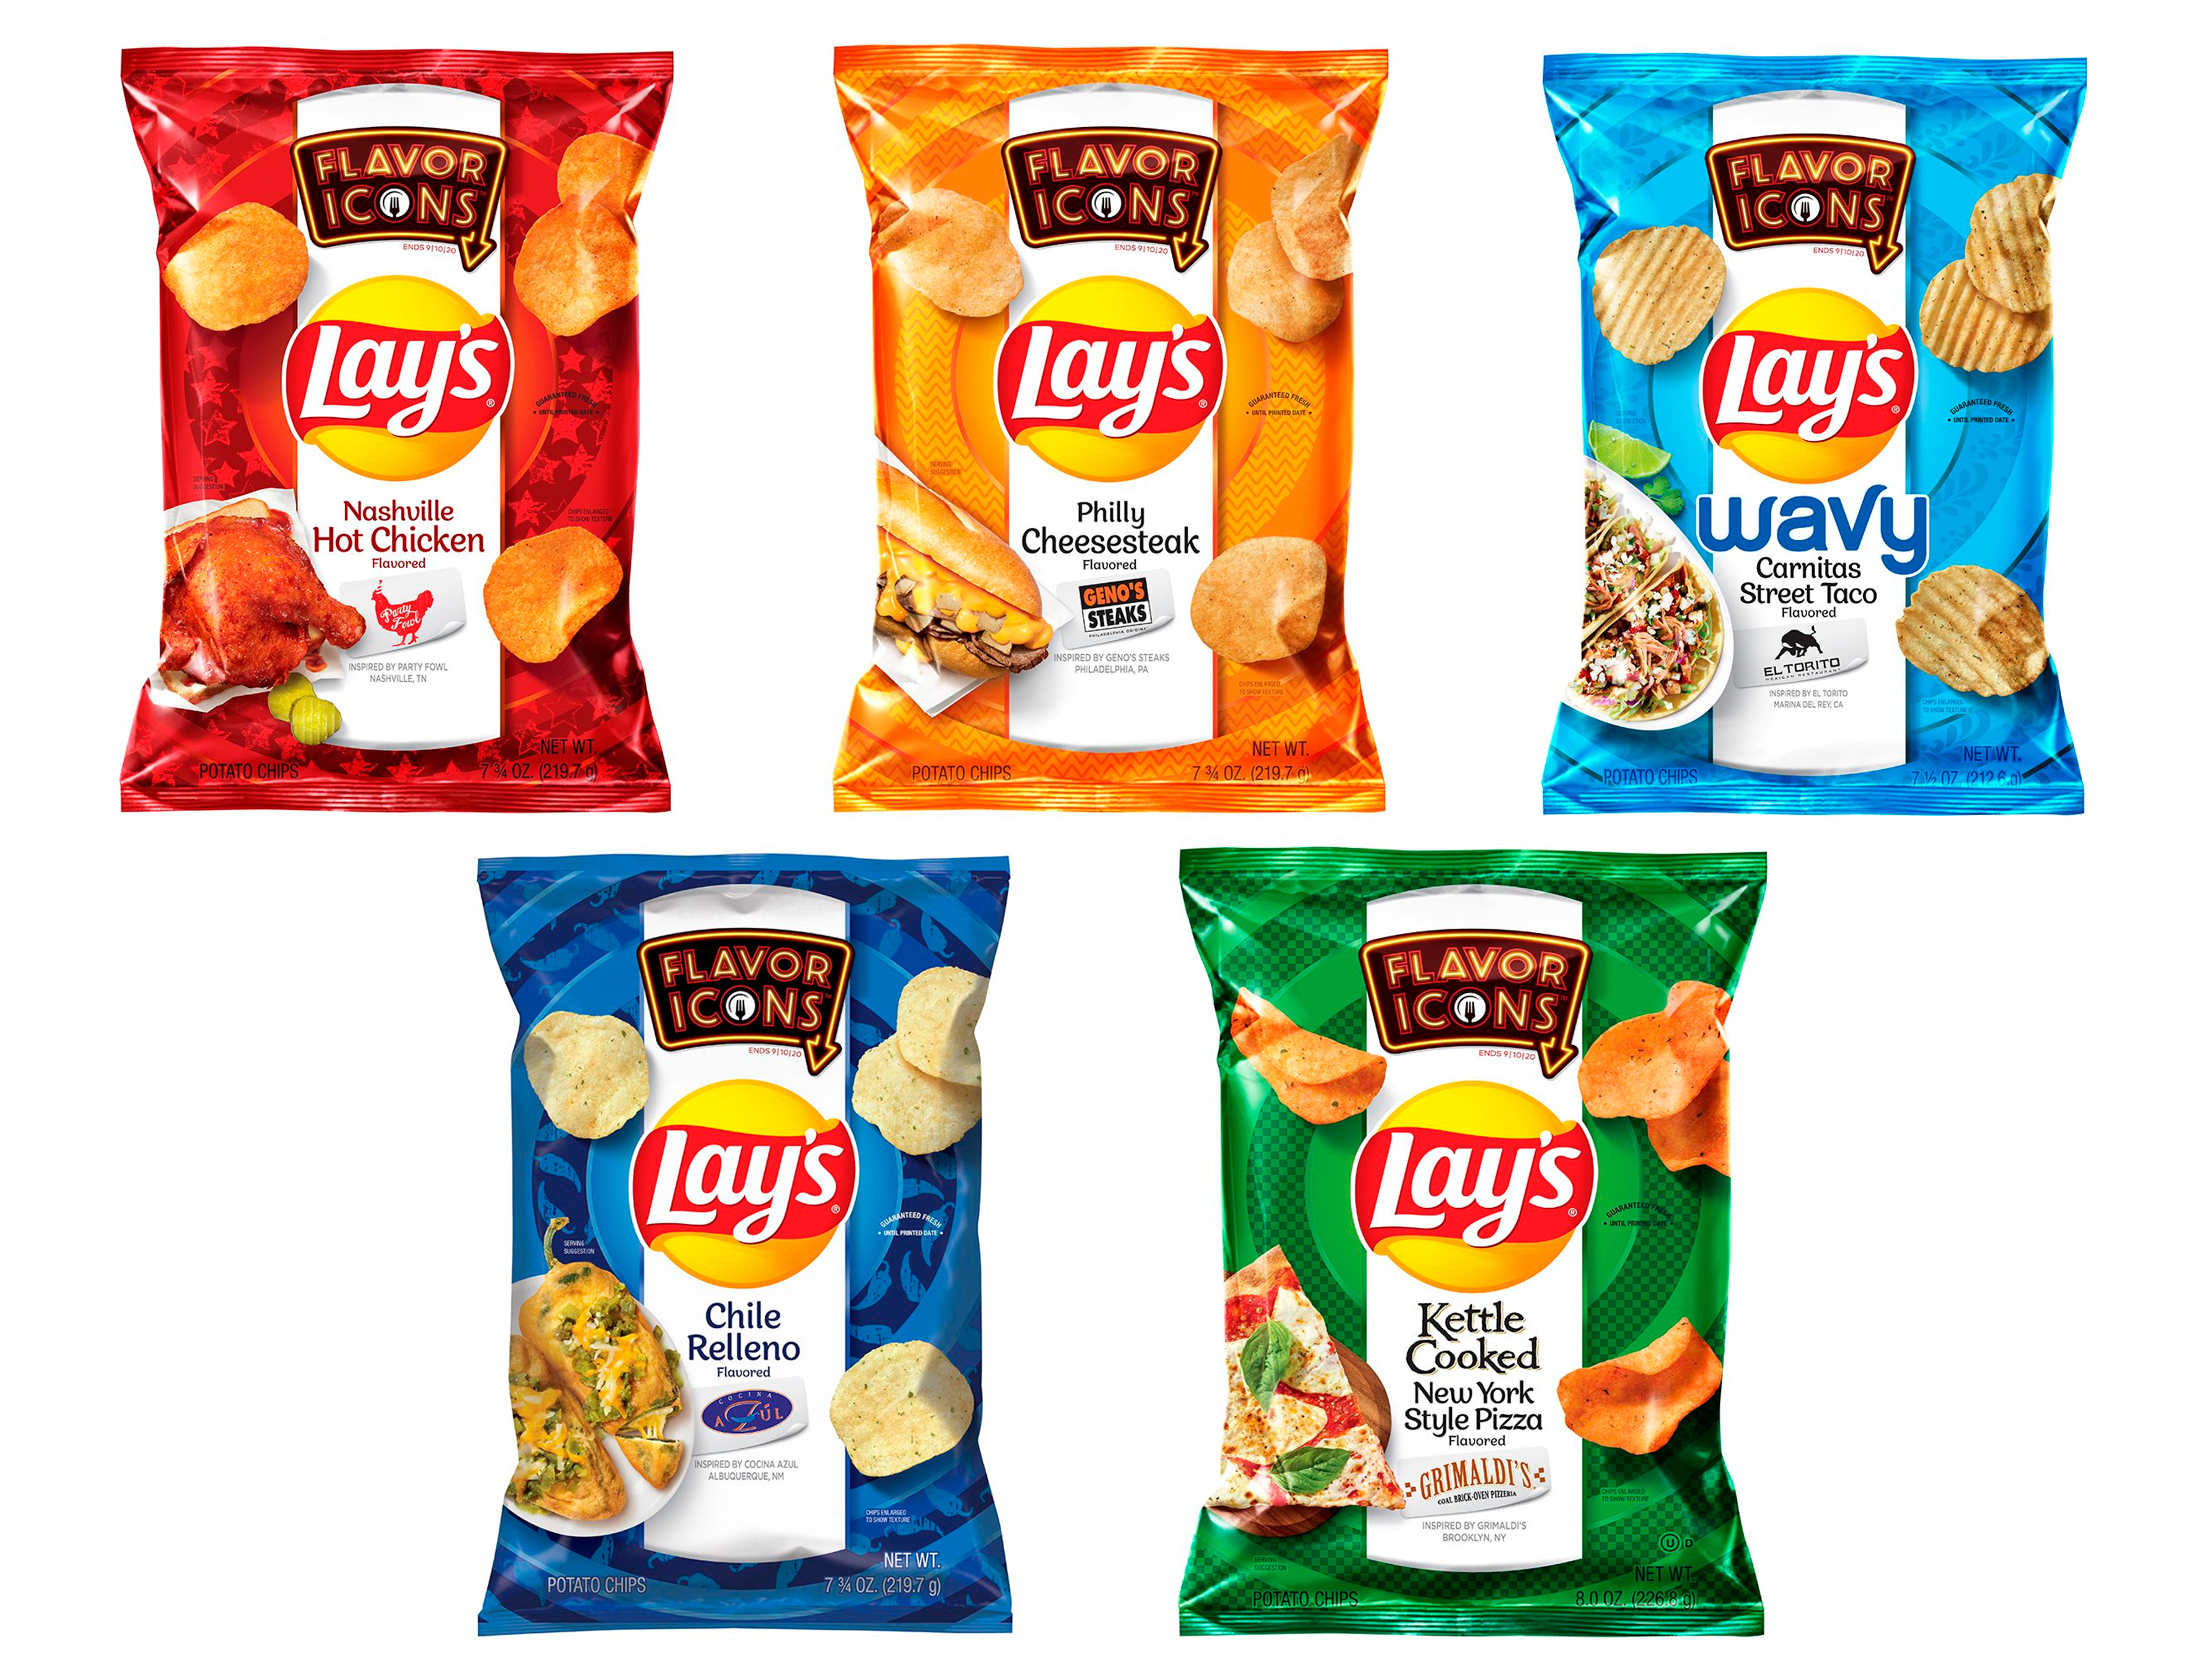 lays-flavor-icons